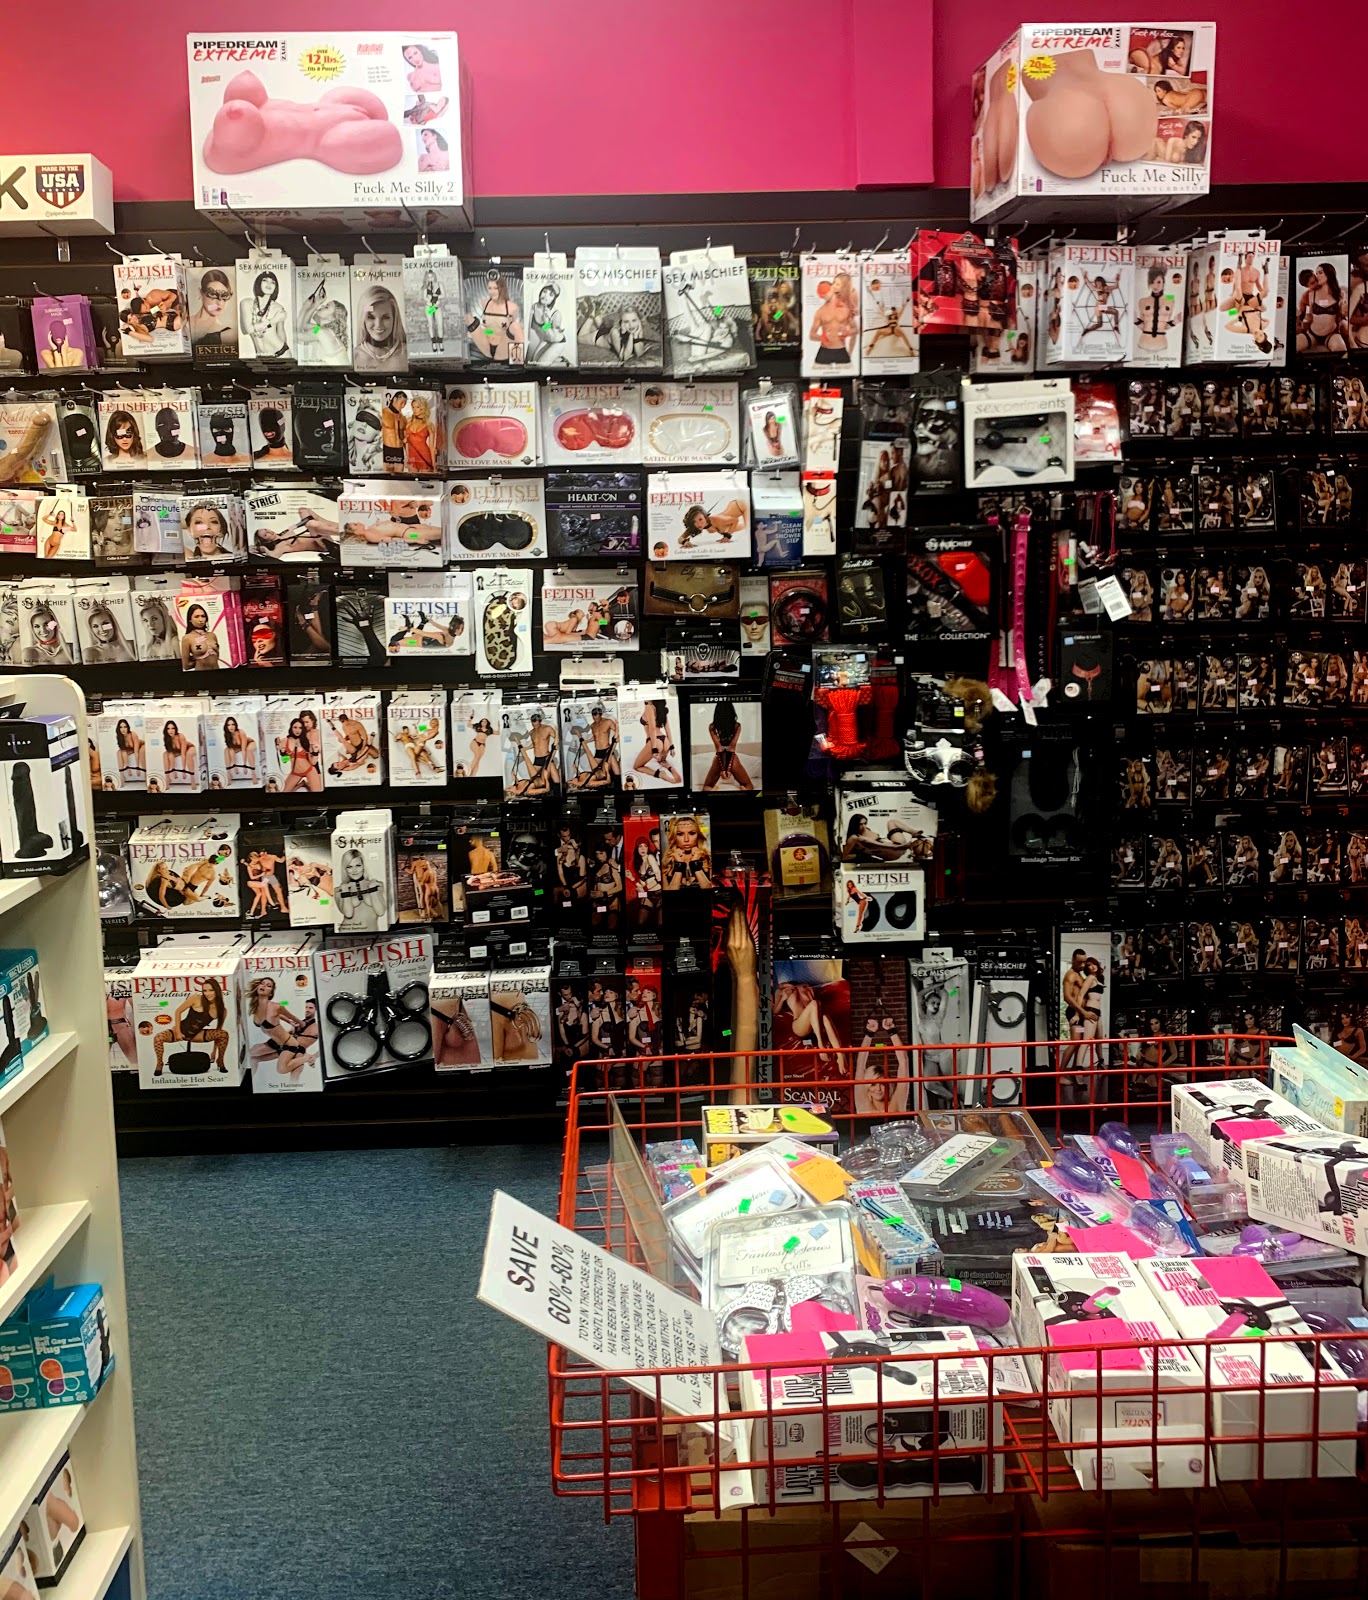 Sexxy Toys & Lingerie - Adult Video Stop » Clothing store in Boca Raton FL